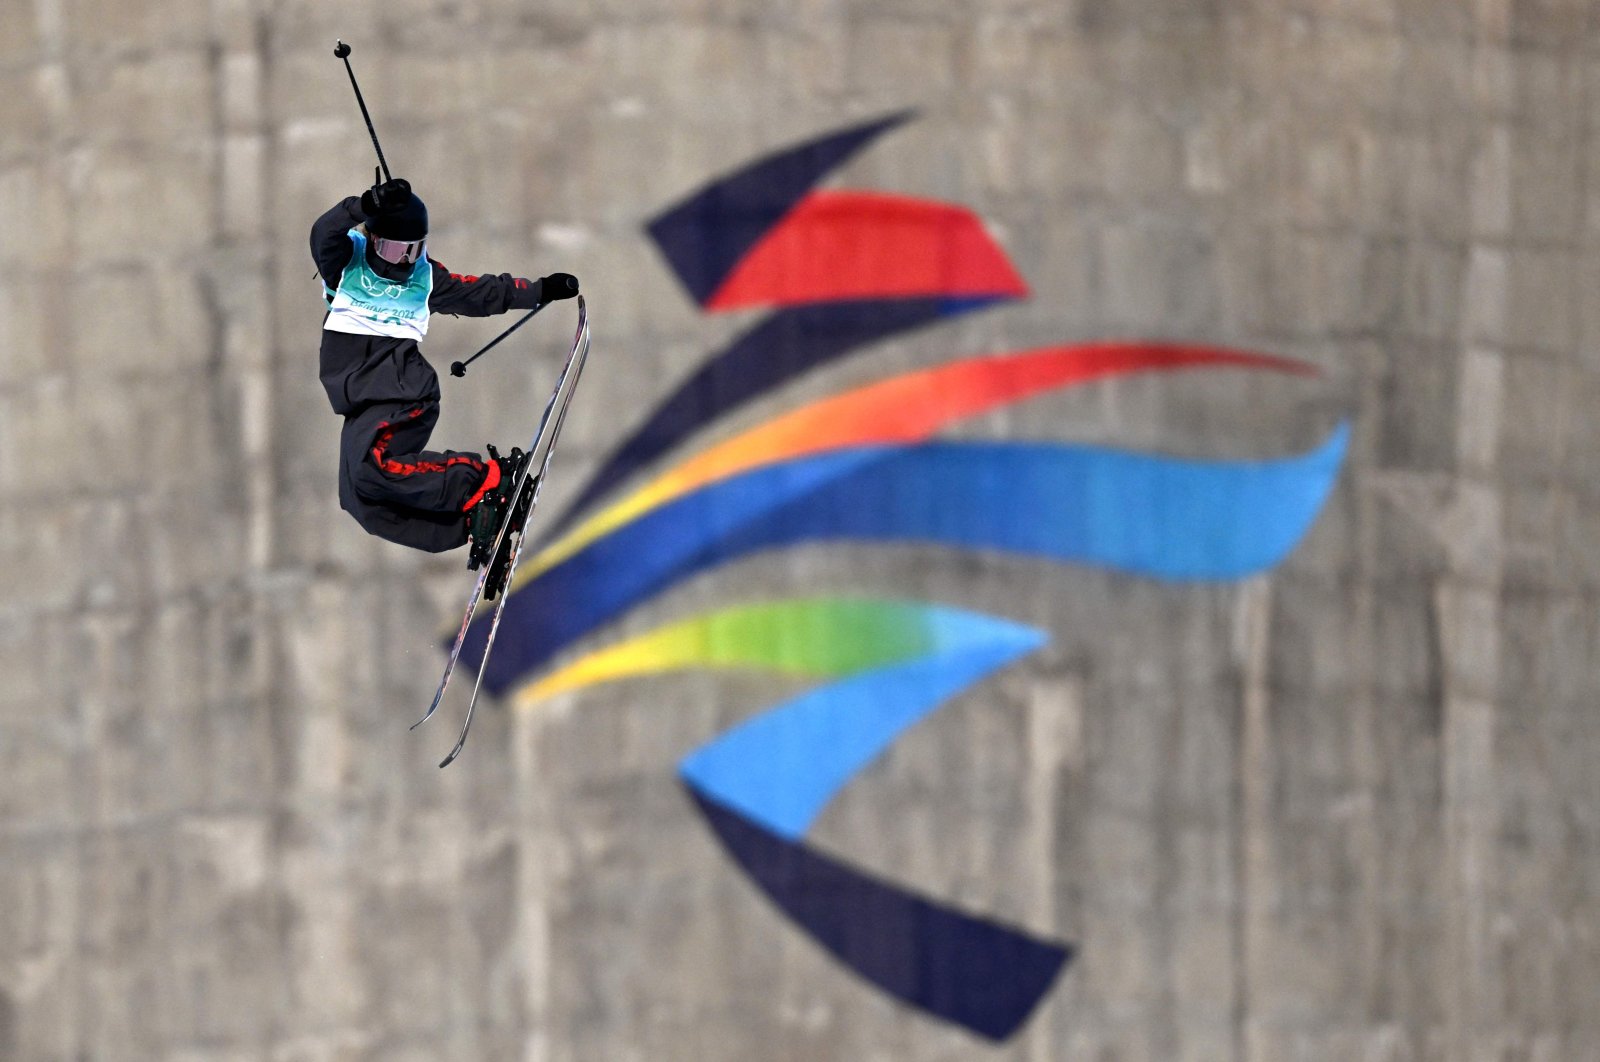 USA&#039;s Maggie Voisin competes in the freestyle skiing women&#039;s freeski big air qualification run during the Beijing 2022 Winter Olympic Games, Beijing, China, Feb. 7, 2022. (AFP Photo)